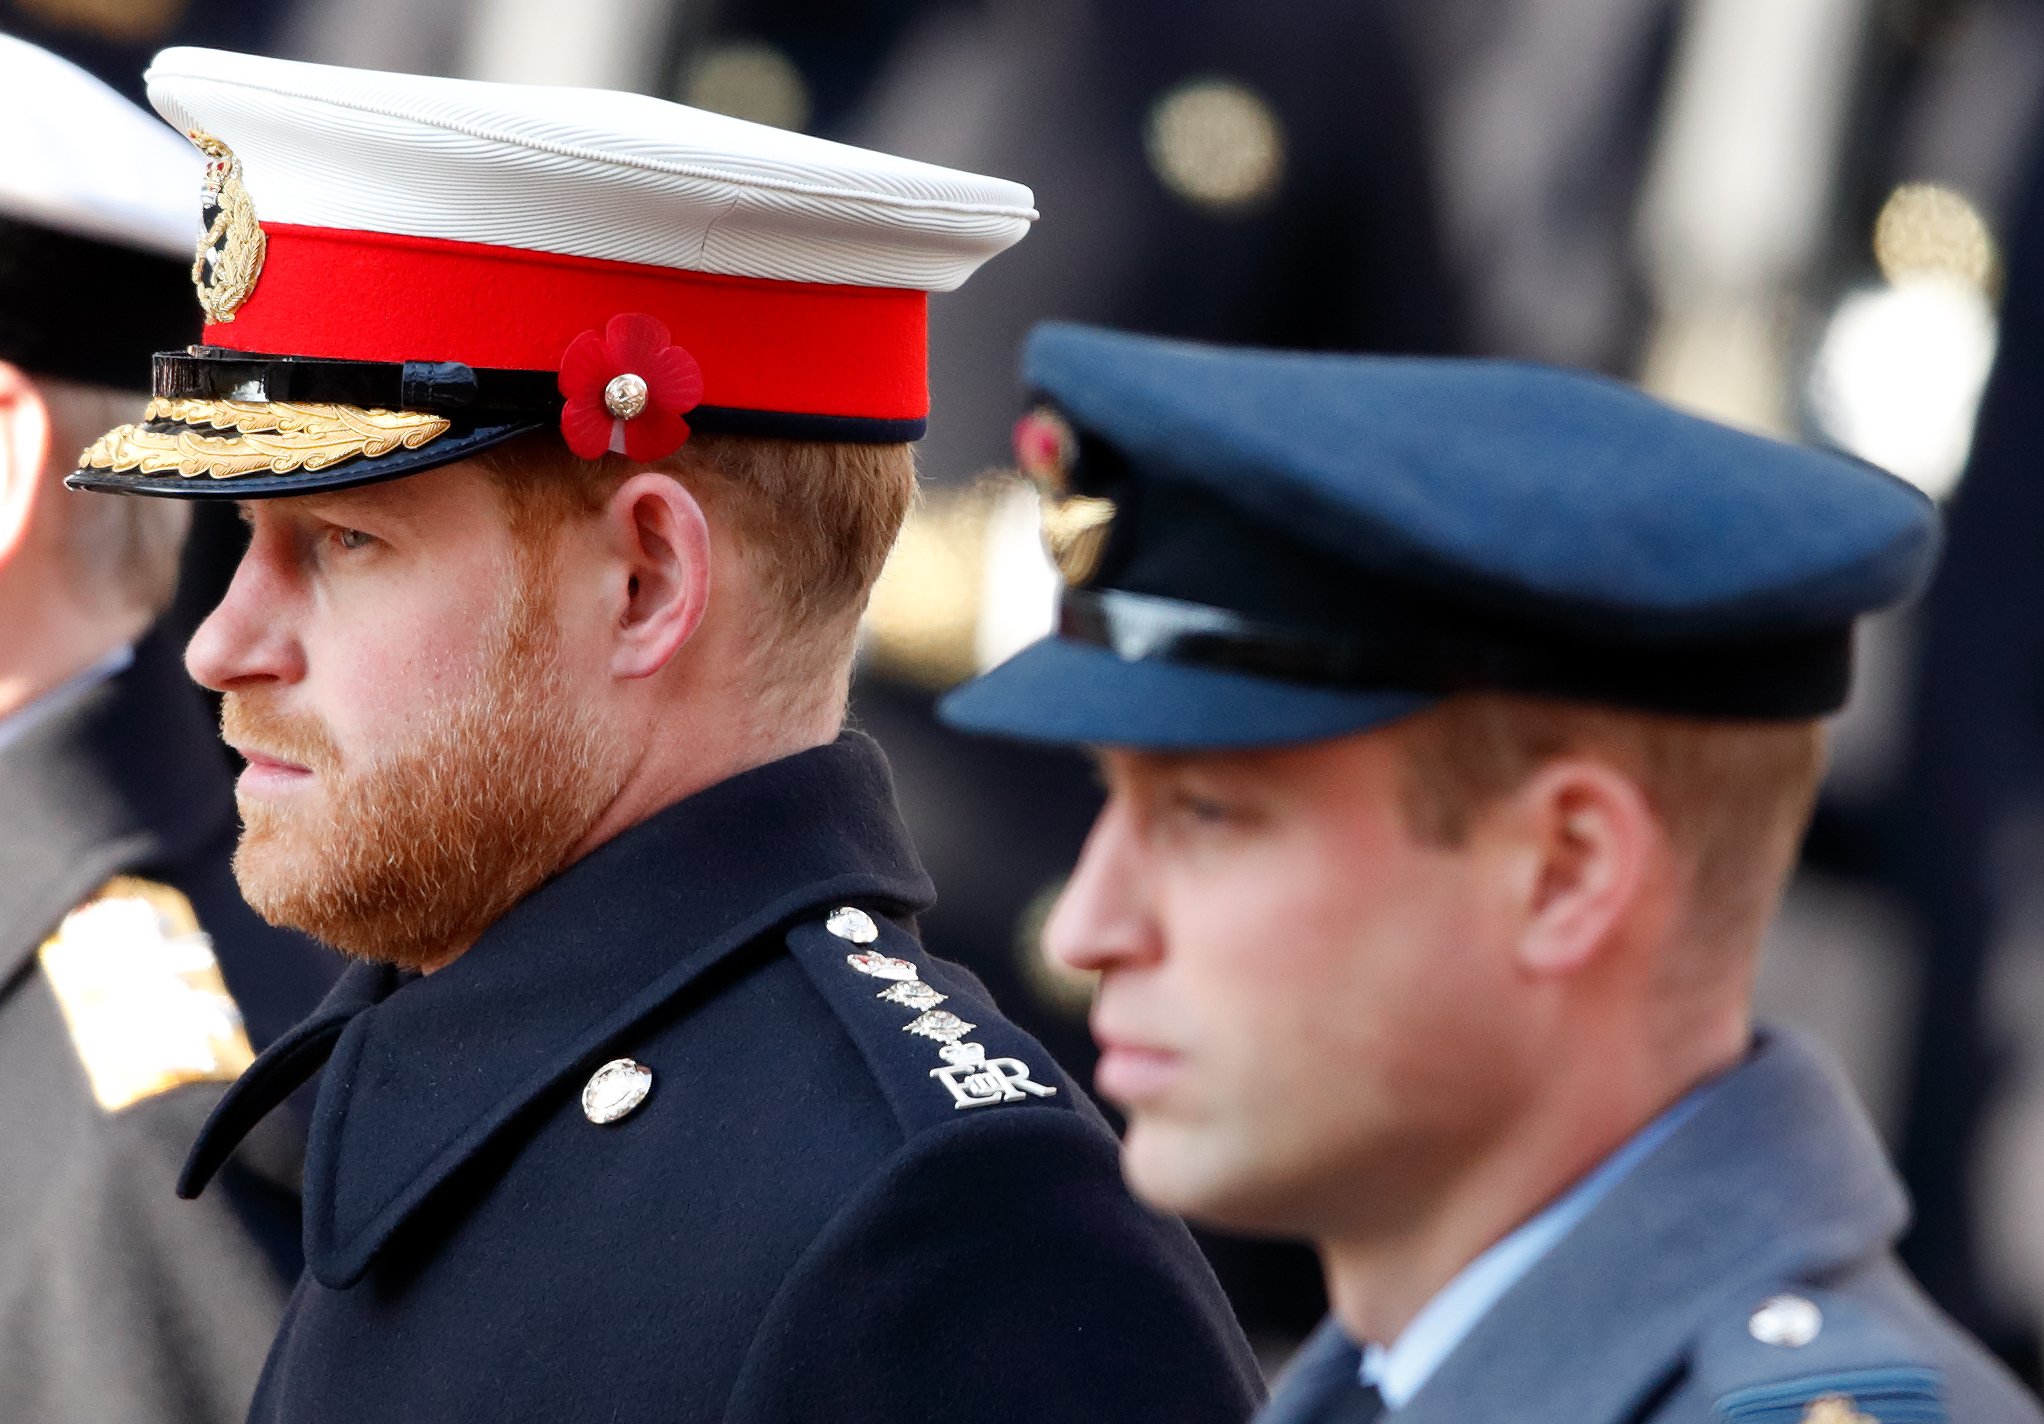 Prince Harry and Prince William attend the Remembrance Sunday service in London, England on November 10, 2019 | Photo: Getty Images